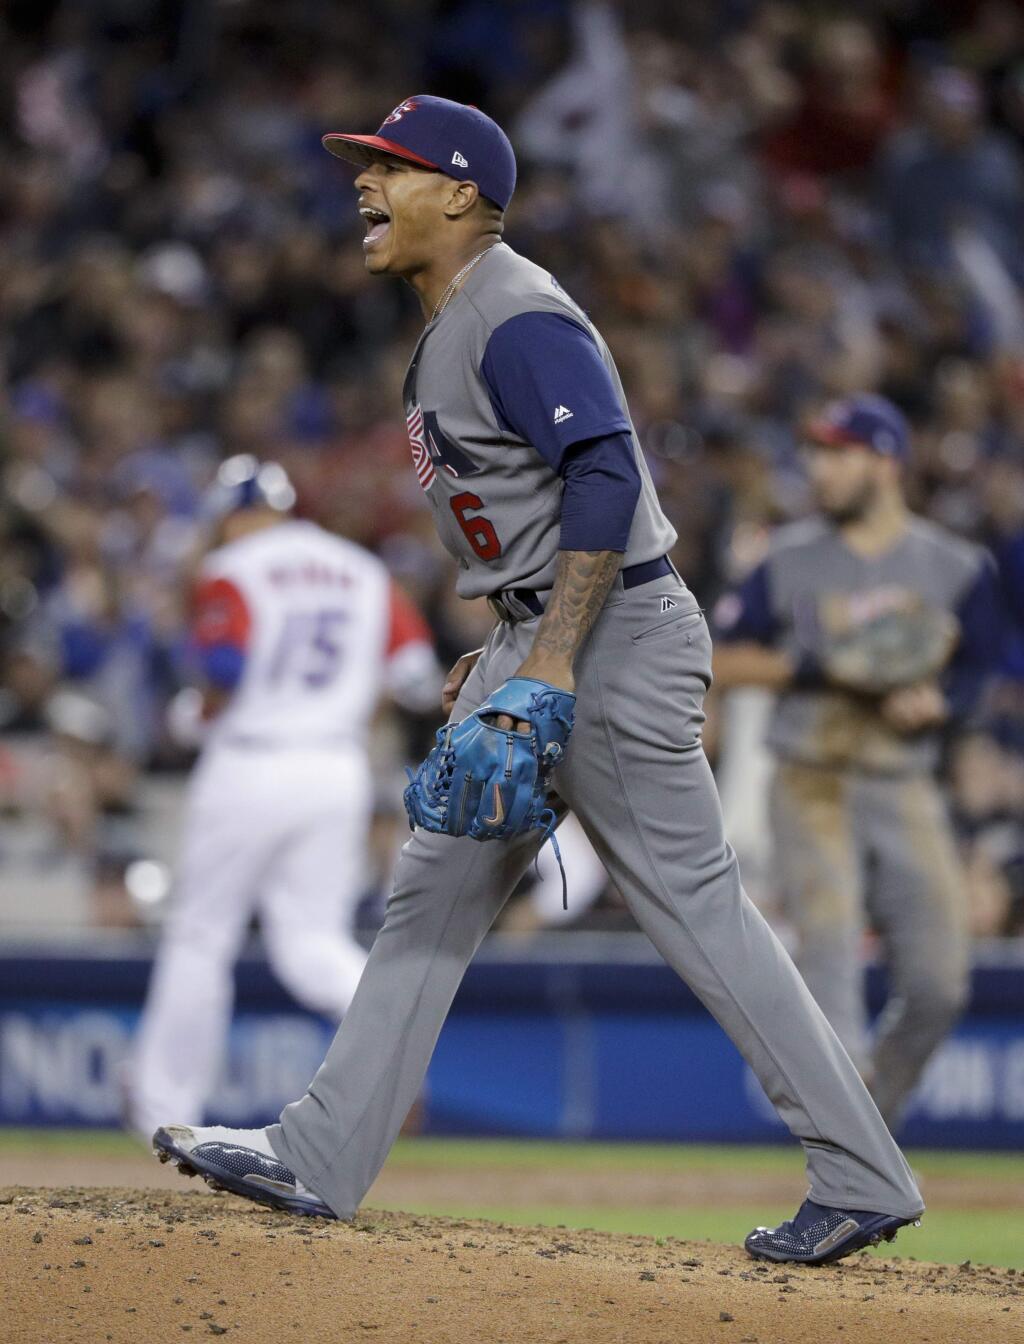 U.S. pitcher Marcus Stroman celebrates an out against Puerto Rico during the fifth inning of the final of the World Baseball Classic in Los Angeles, Wednesday, March 22, 2017. (AP Photo/Jae C. Hong)